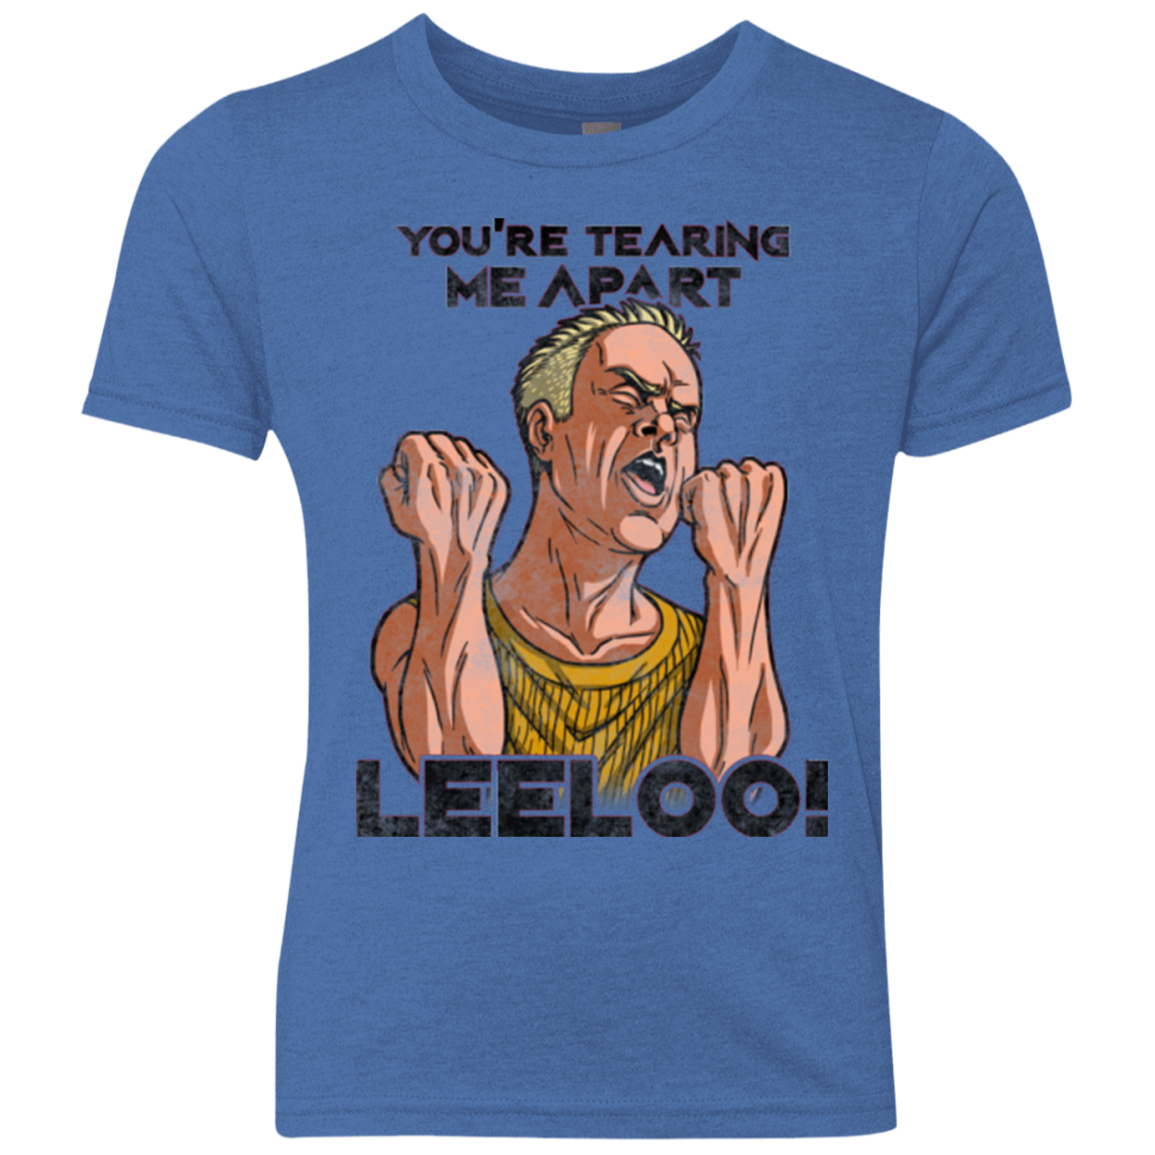 Youre Tearing Me Apart Leeloo Youth Triblend T-Shirt